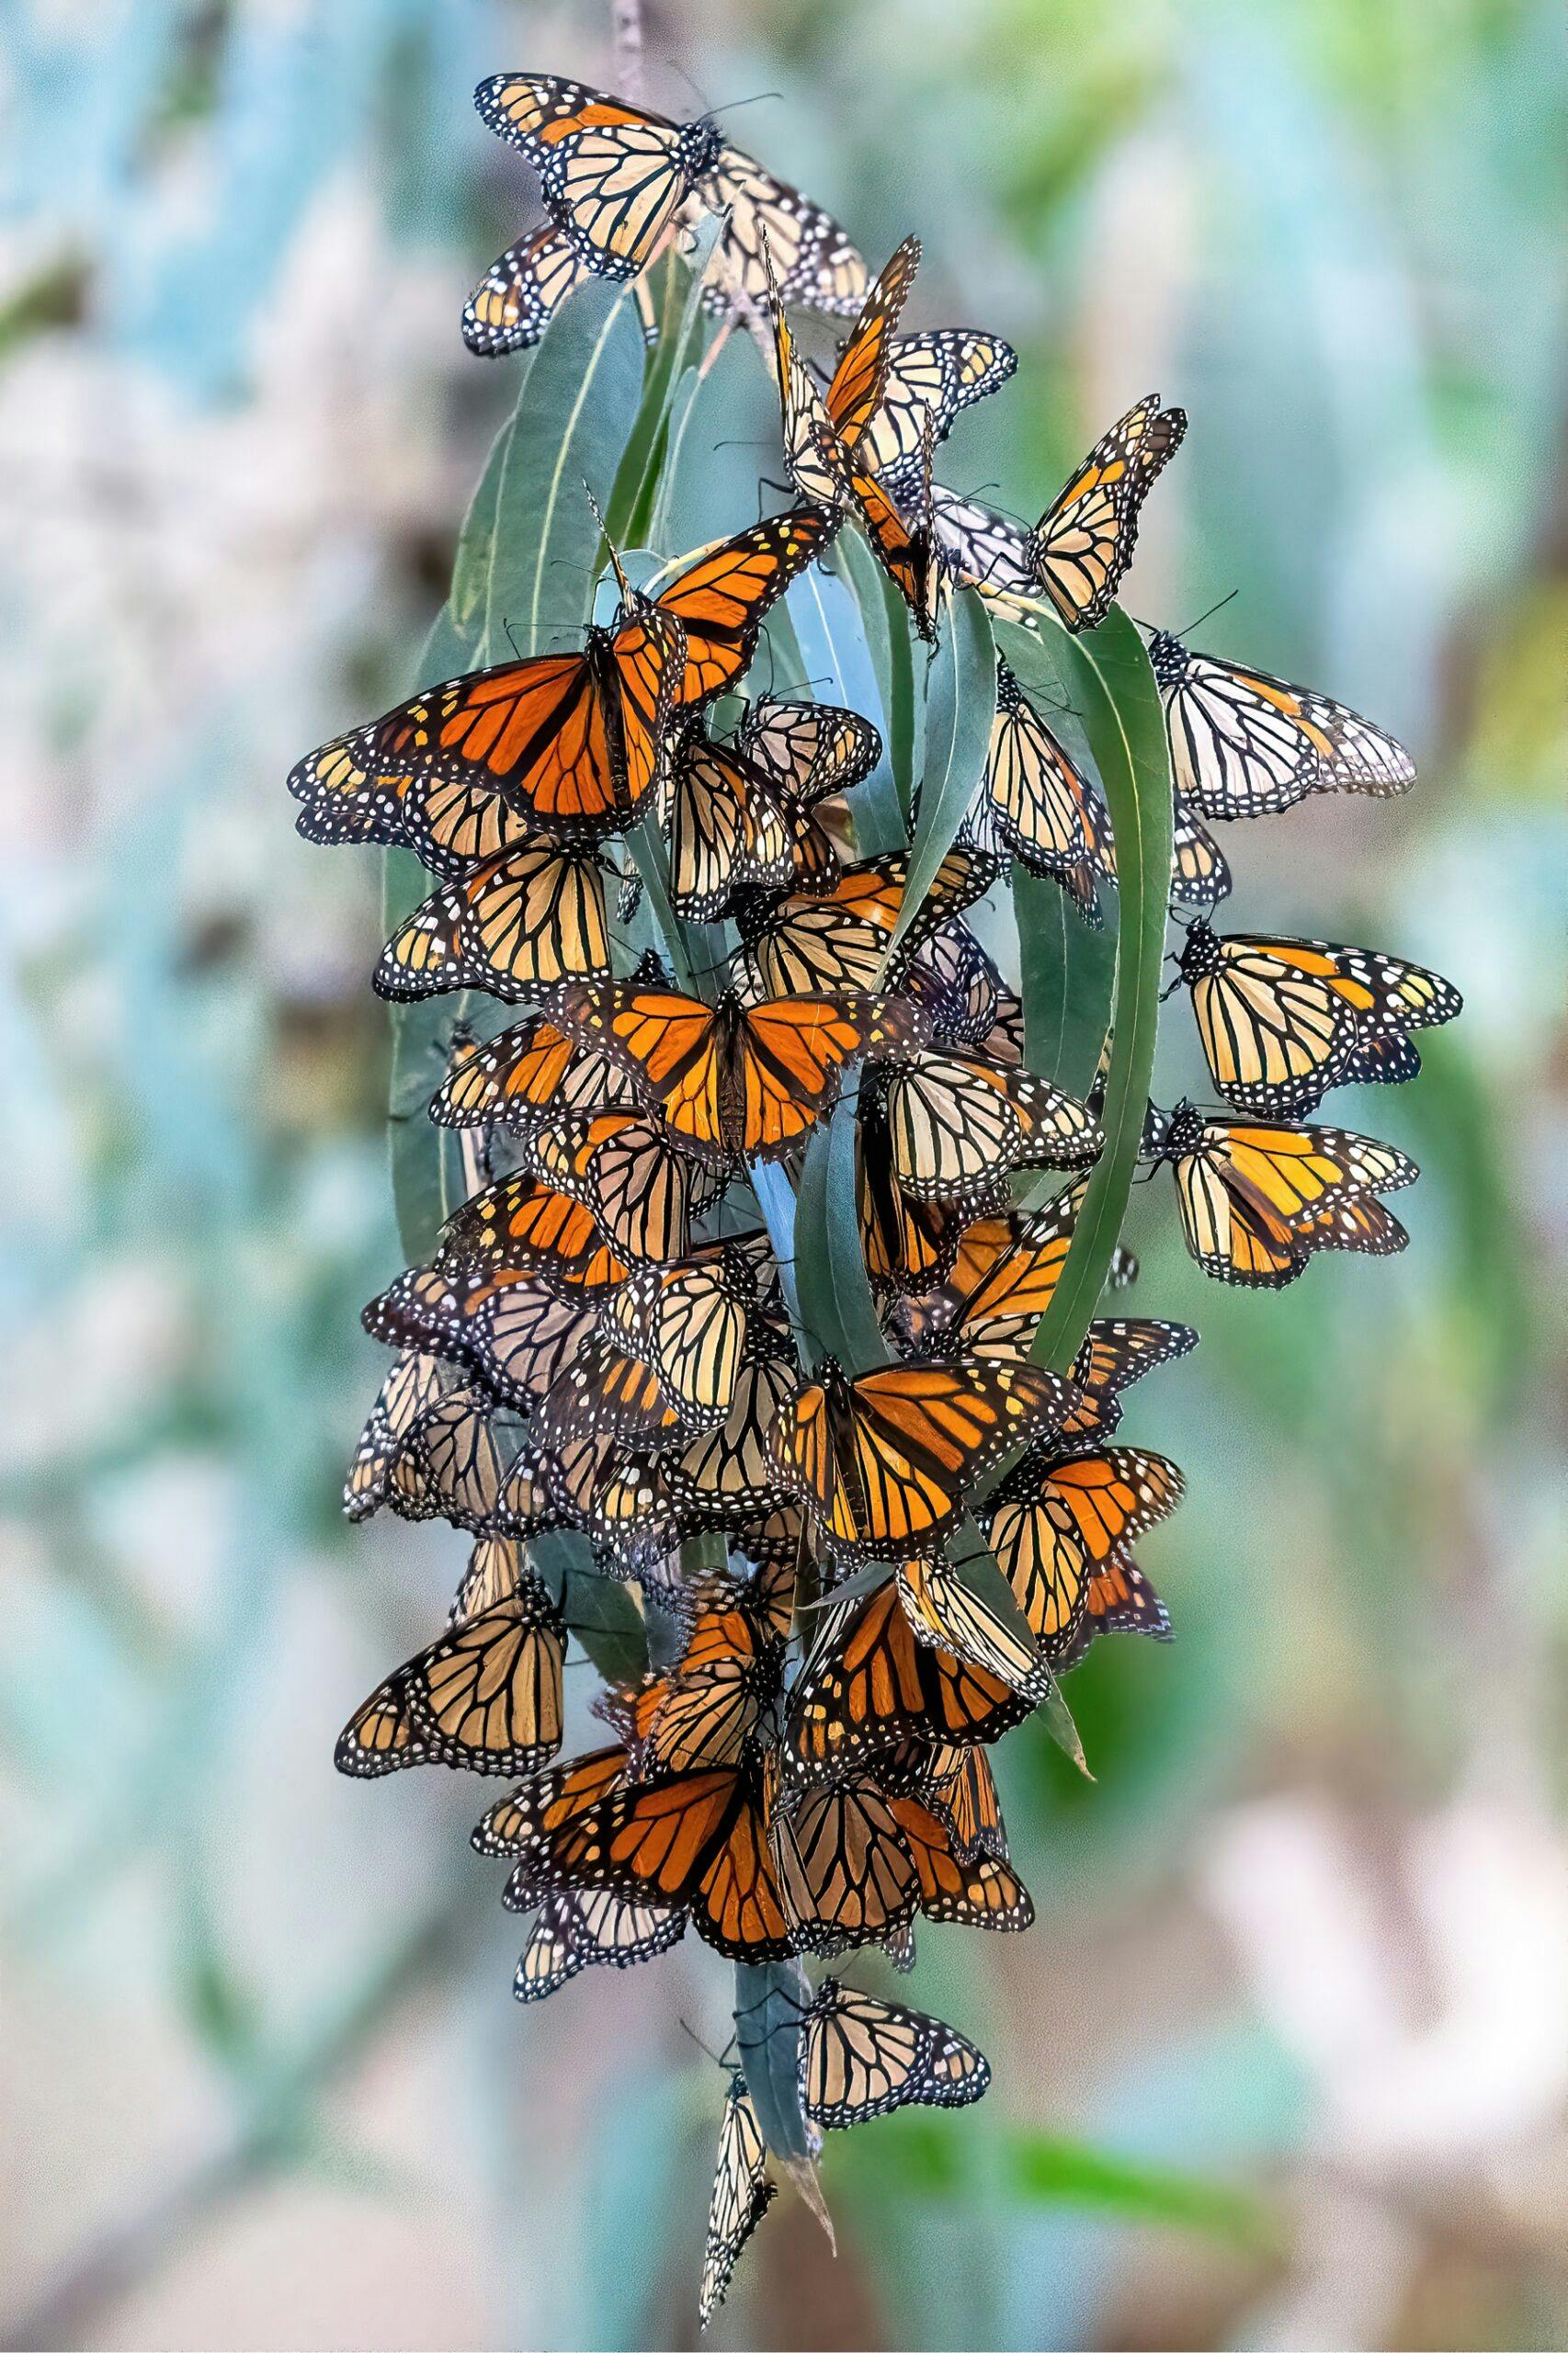 A cluster of monarch butterflies gather on a eucalyptus branch